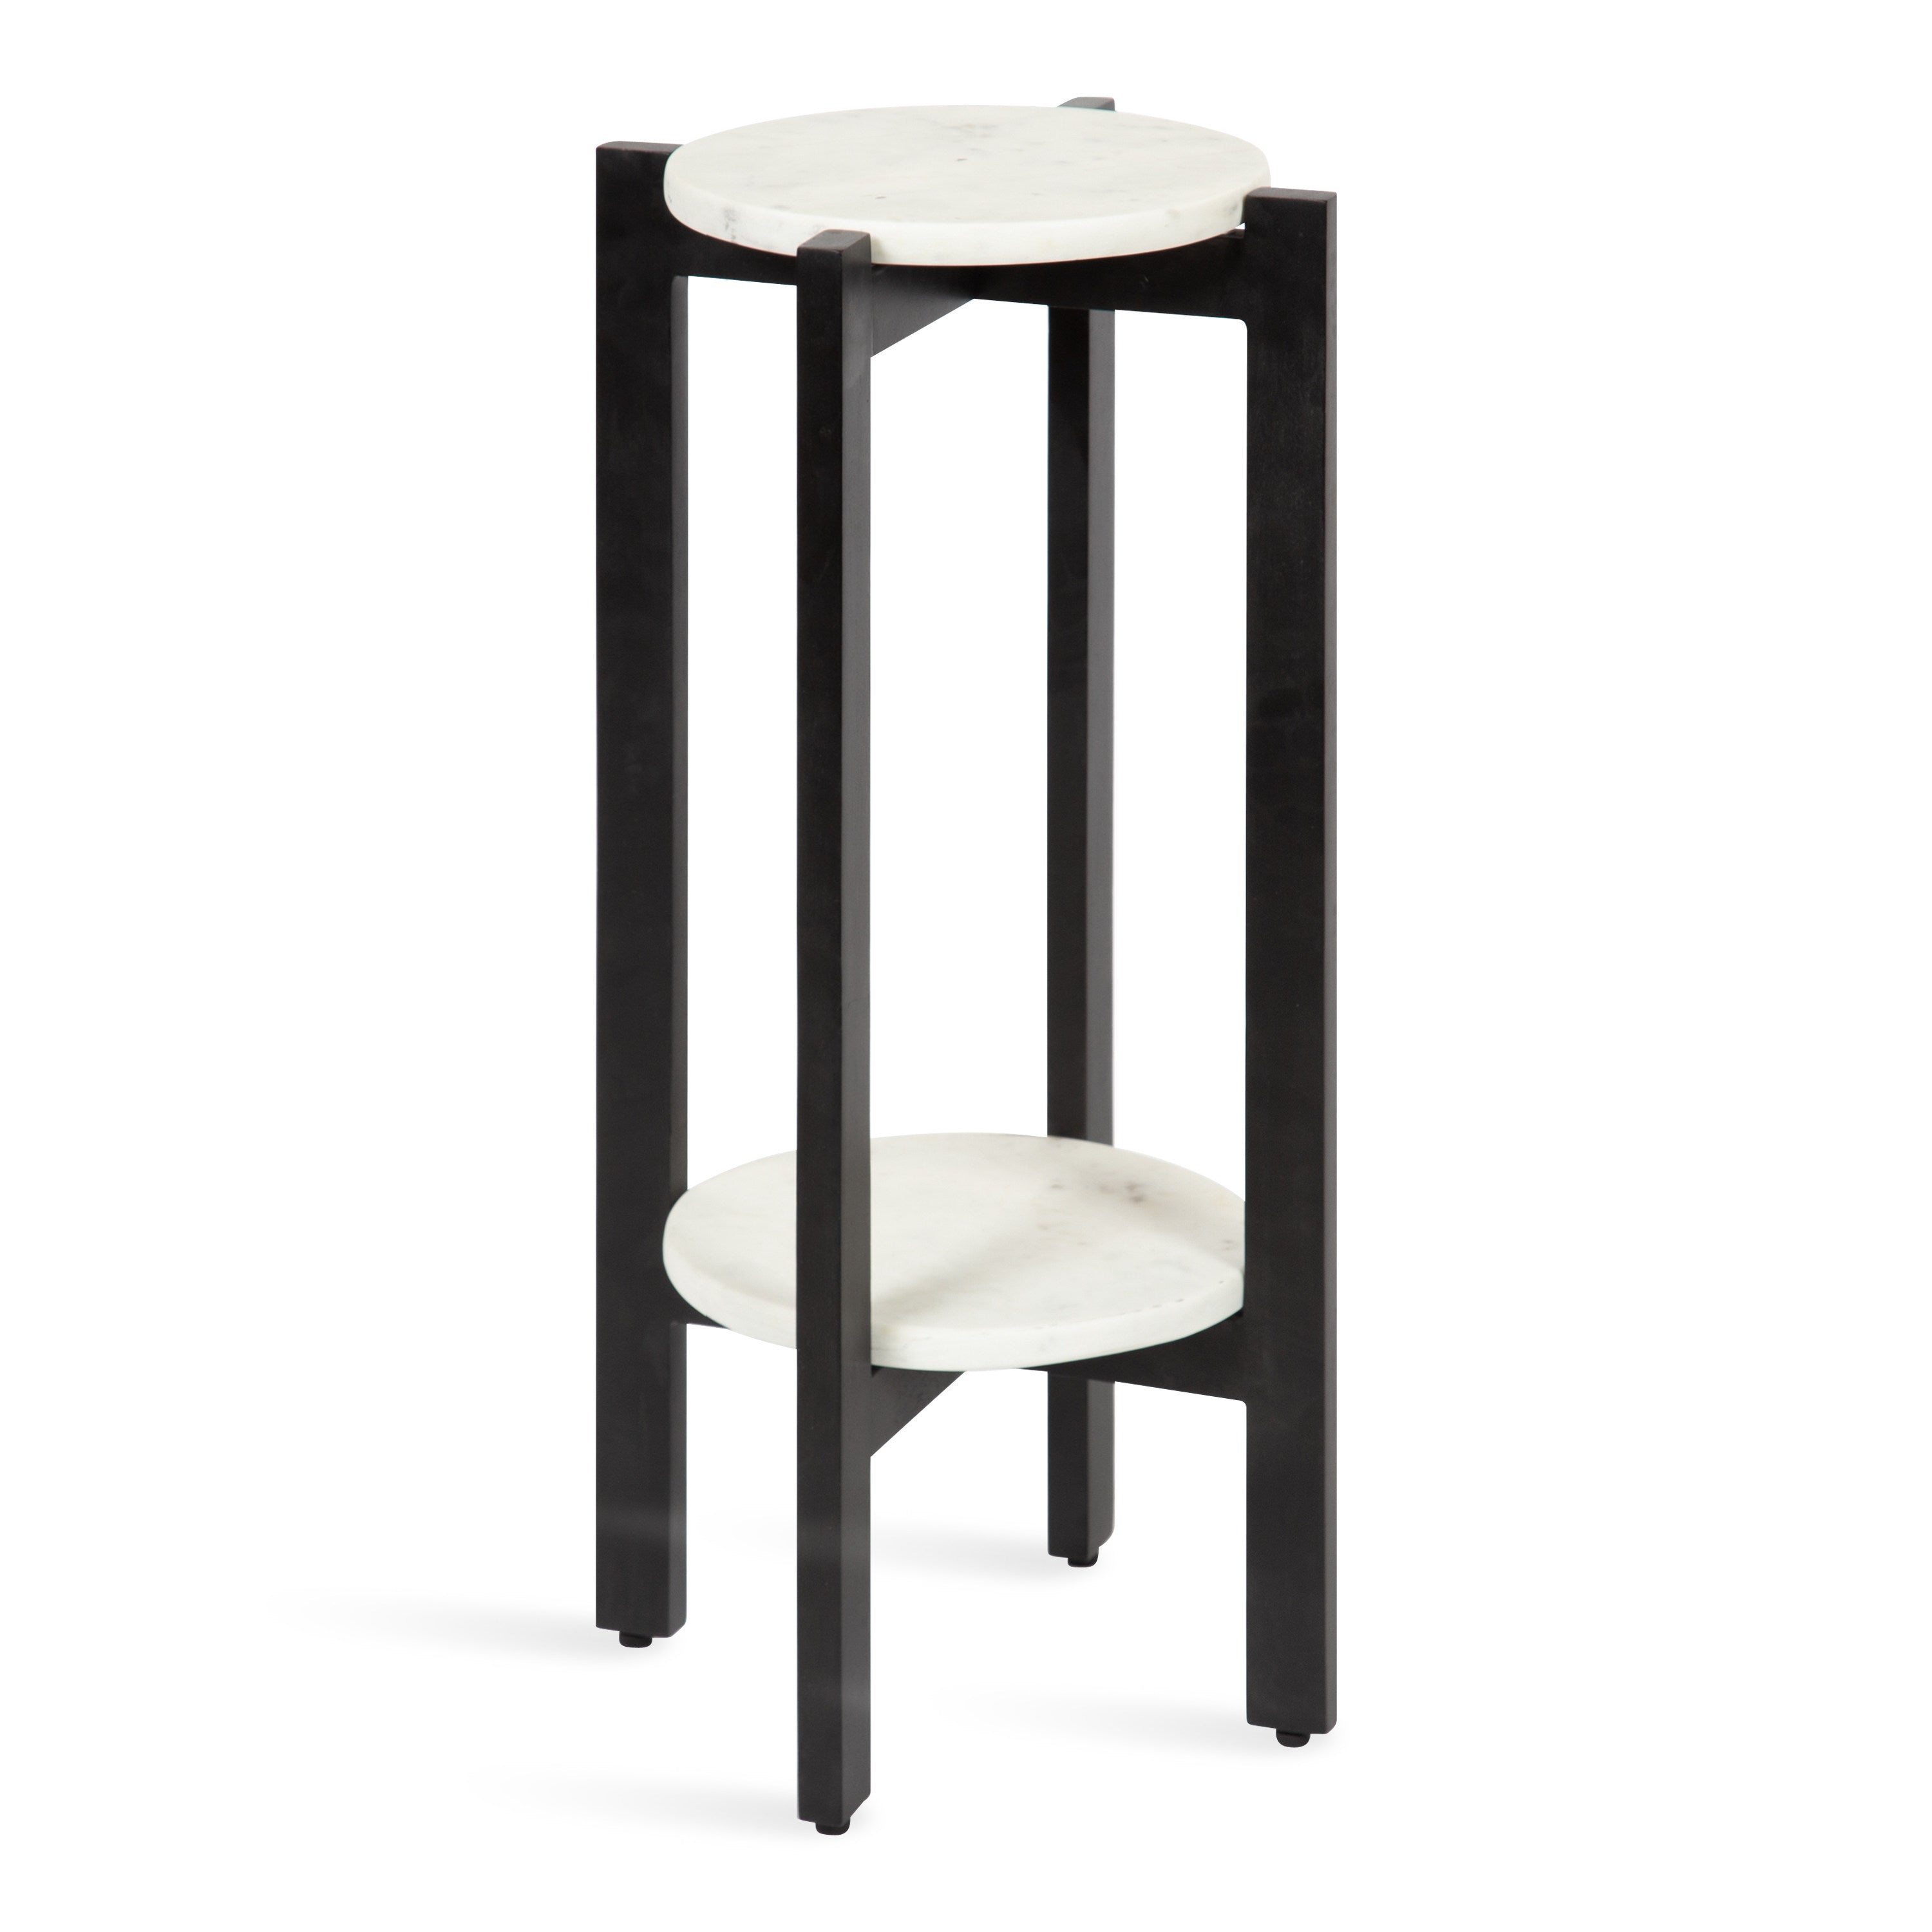 Moxley Round Accent Table